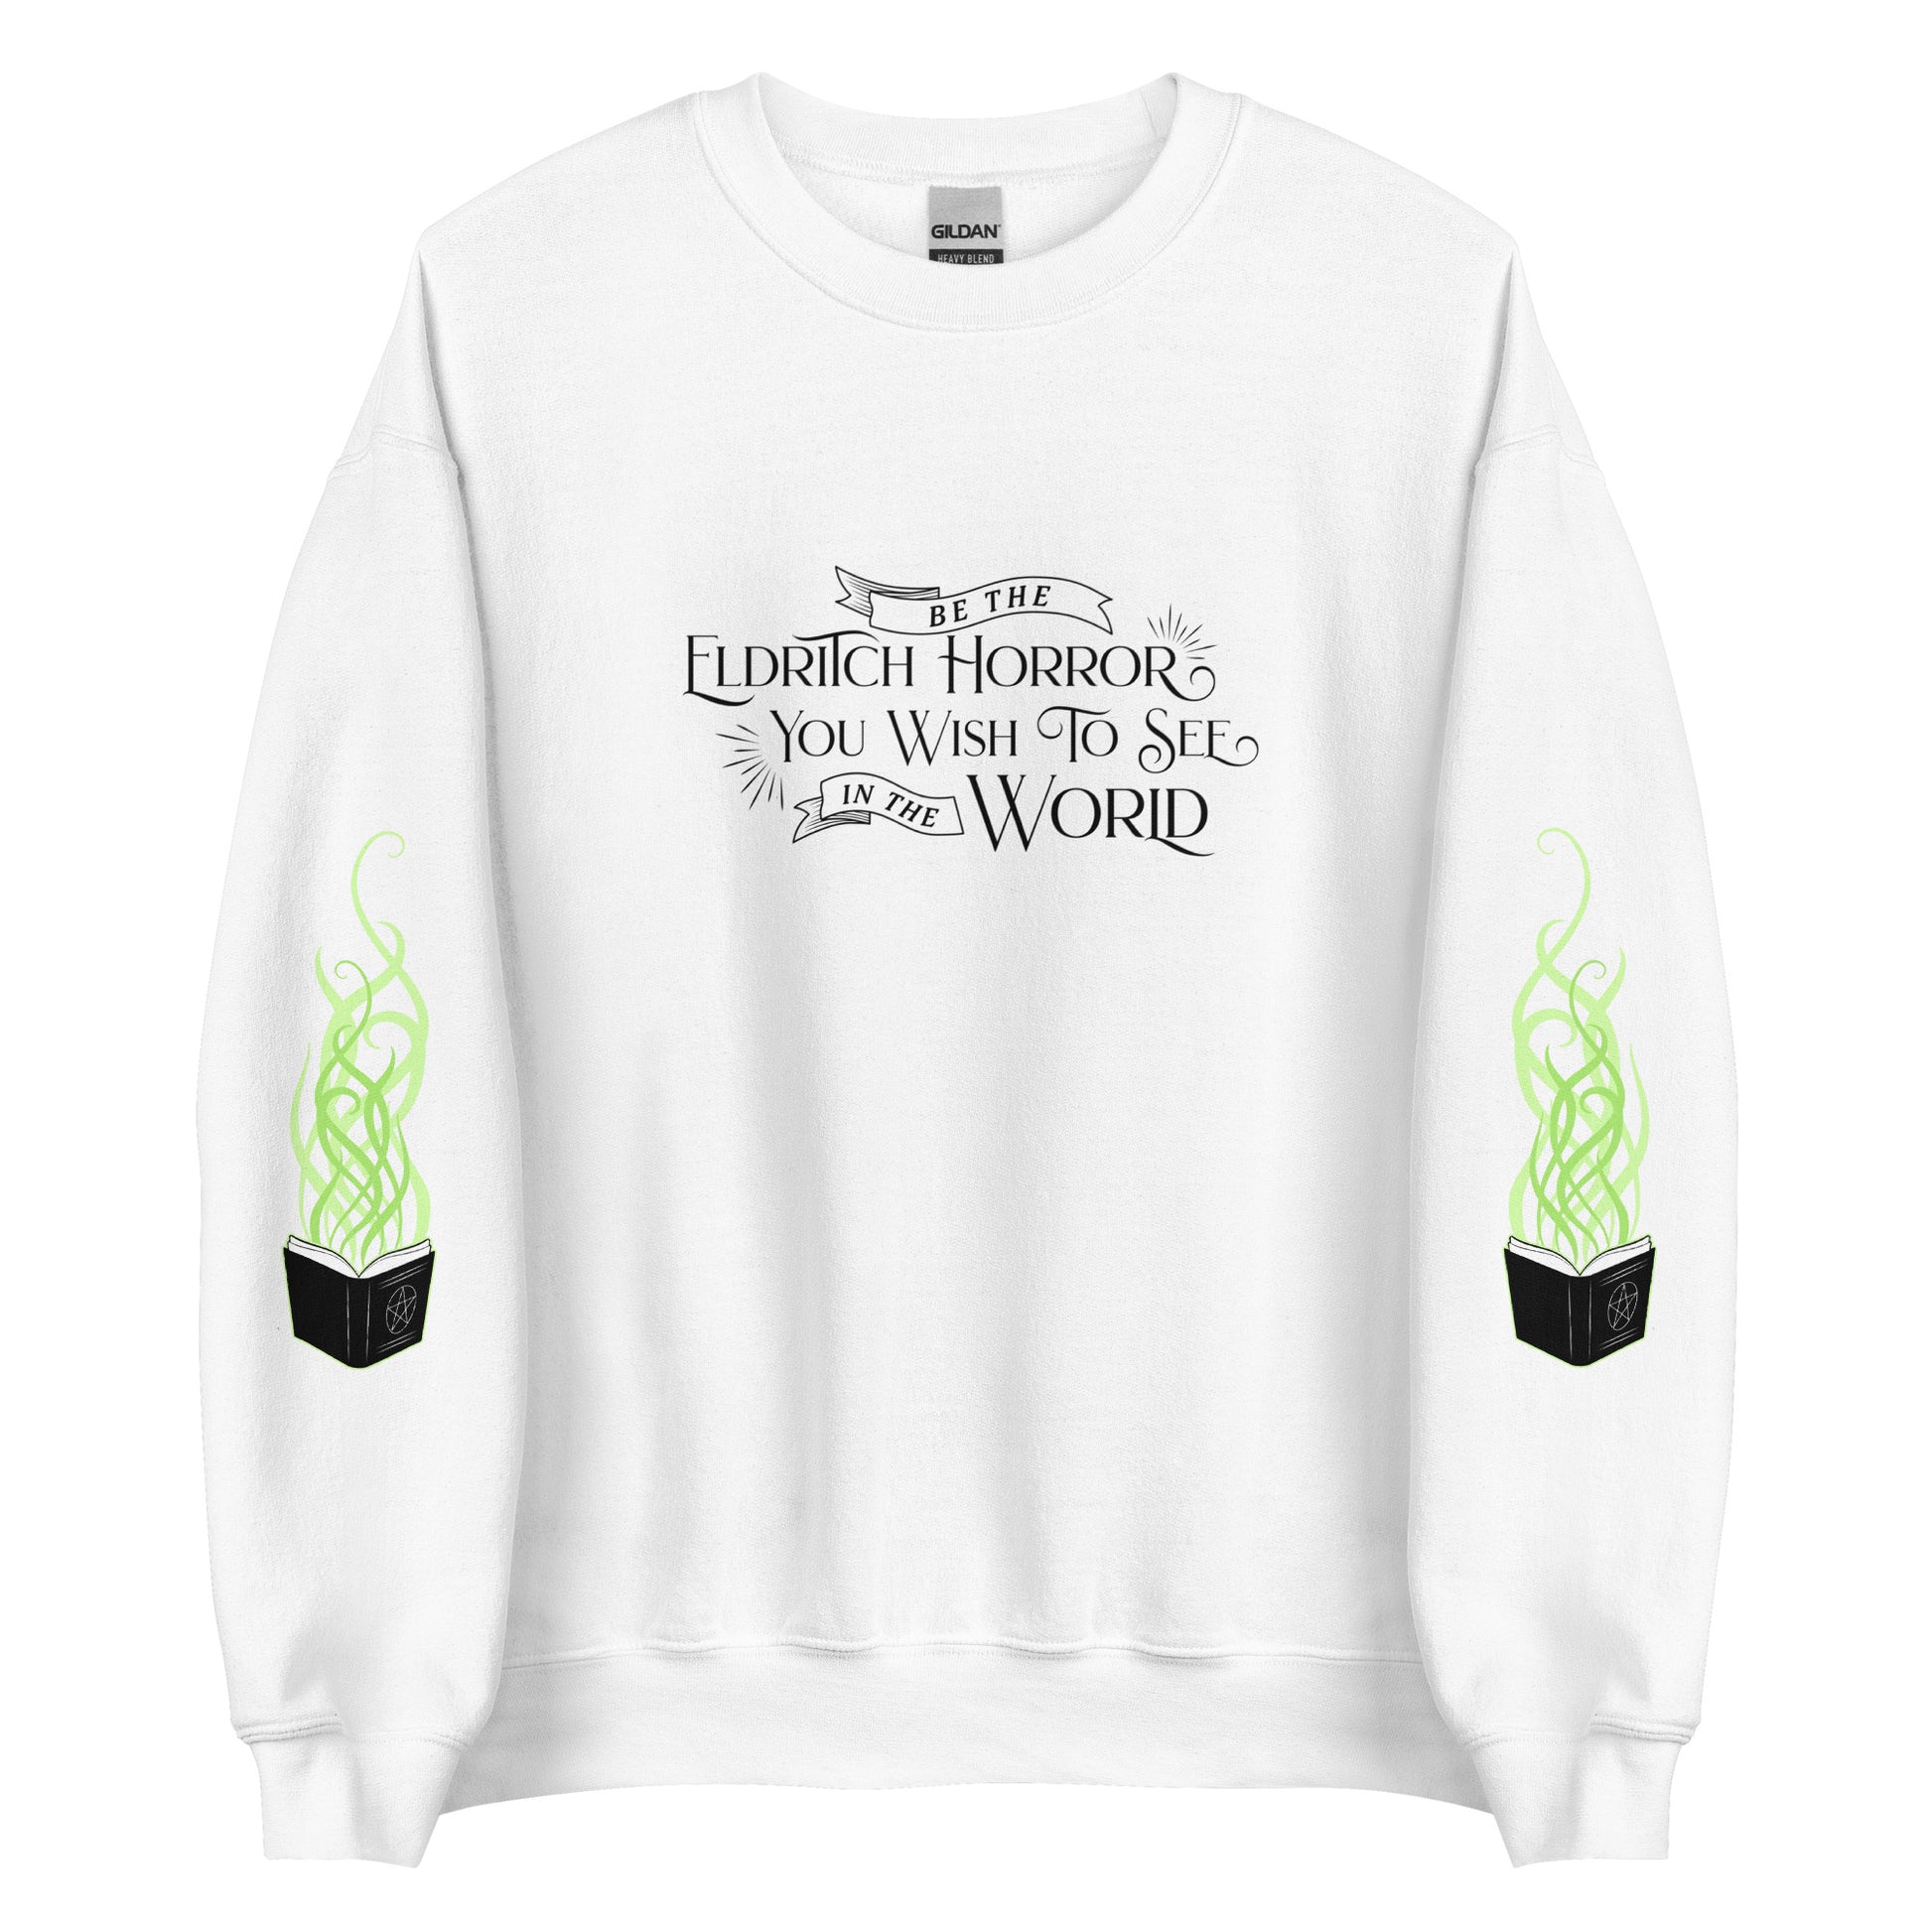 A white crewneck sweatshirt with black old-fashioned text on the chest that reads "Be The Eldritch Horror You Wish To See In The World". On each sleeve is an illustration of a spellbook with green magical tendrils spreading upward from the pages.